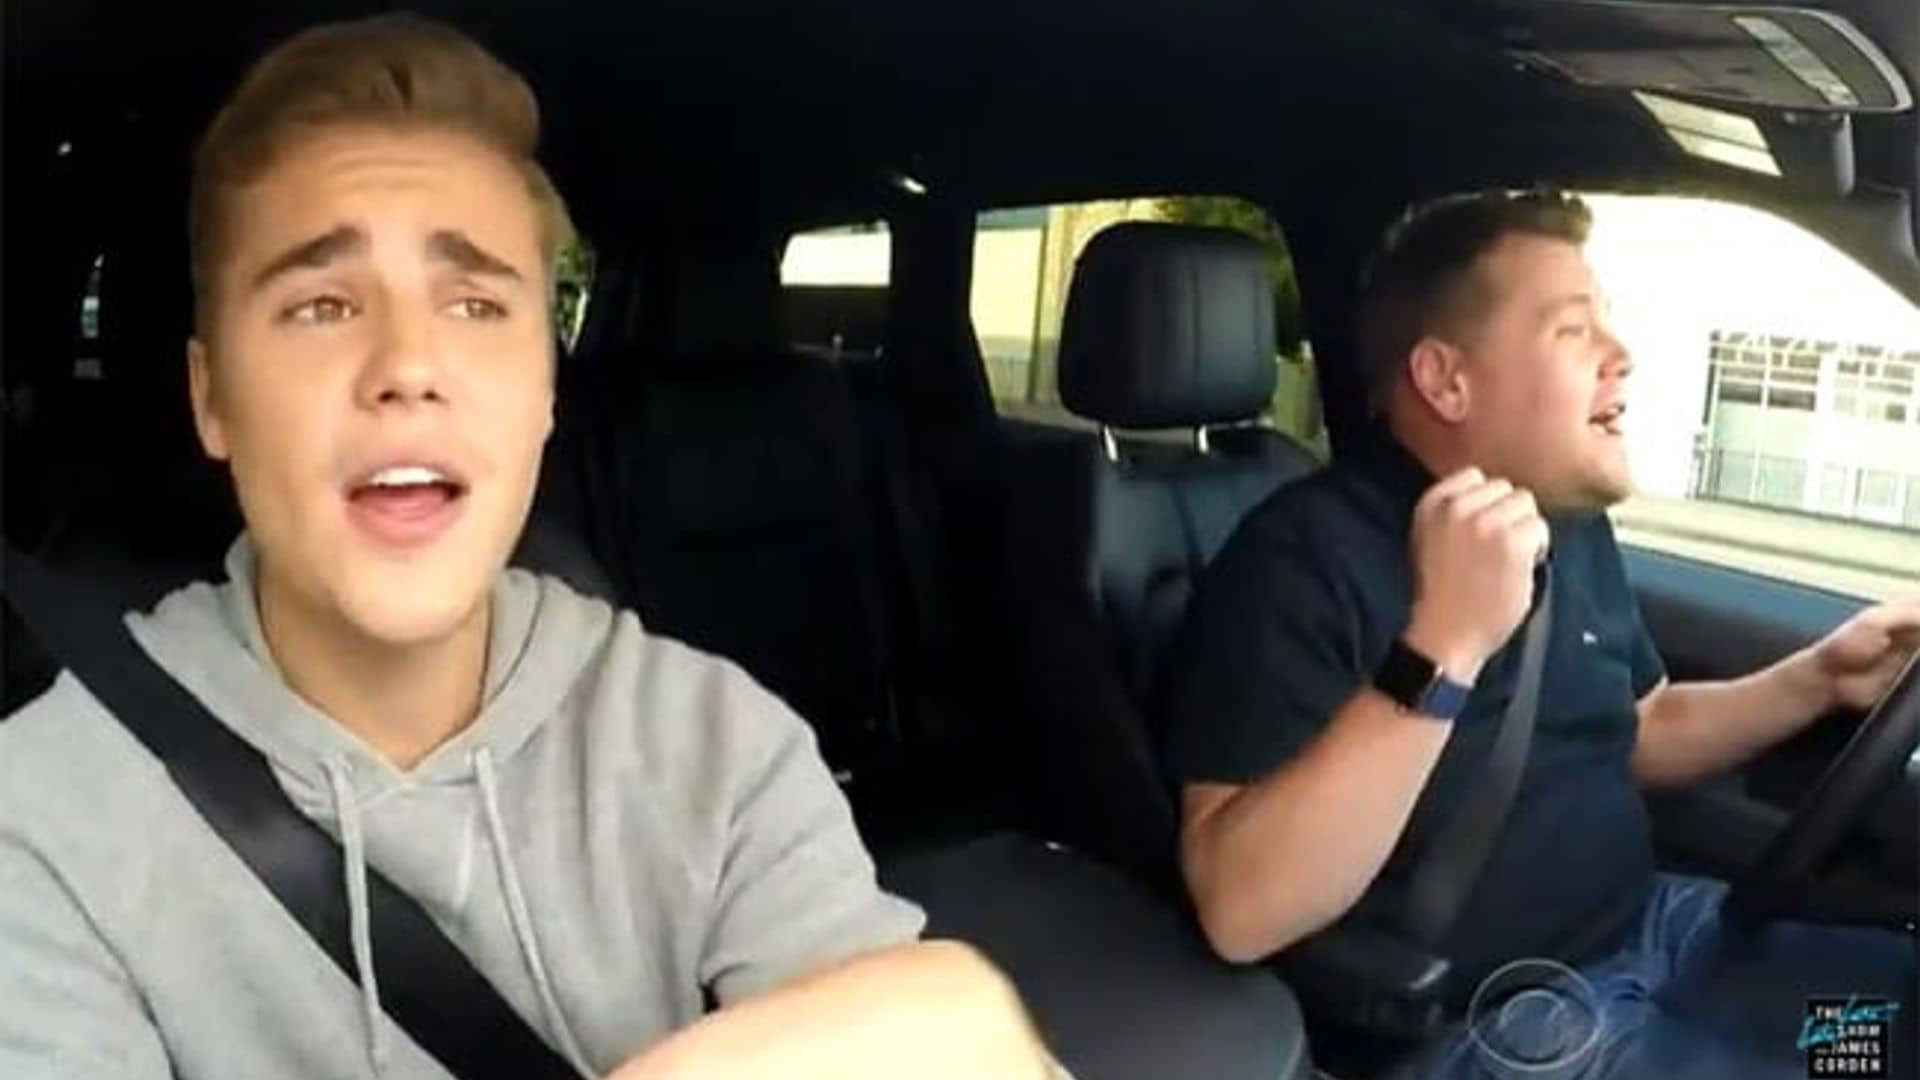 Justin Bieber sings 'Baby' with James Corden, shares his 10-year plan